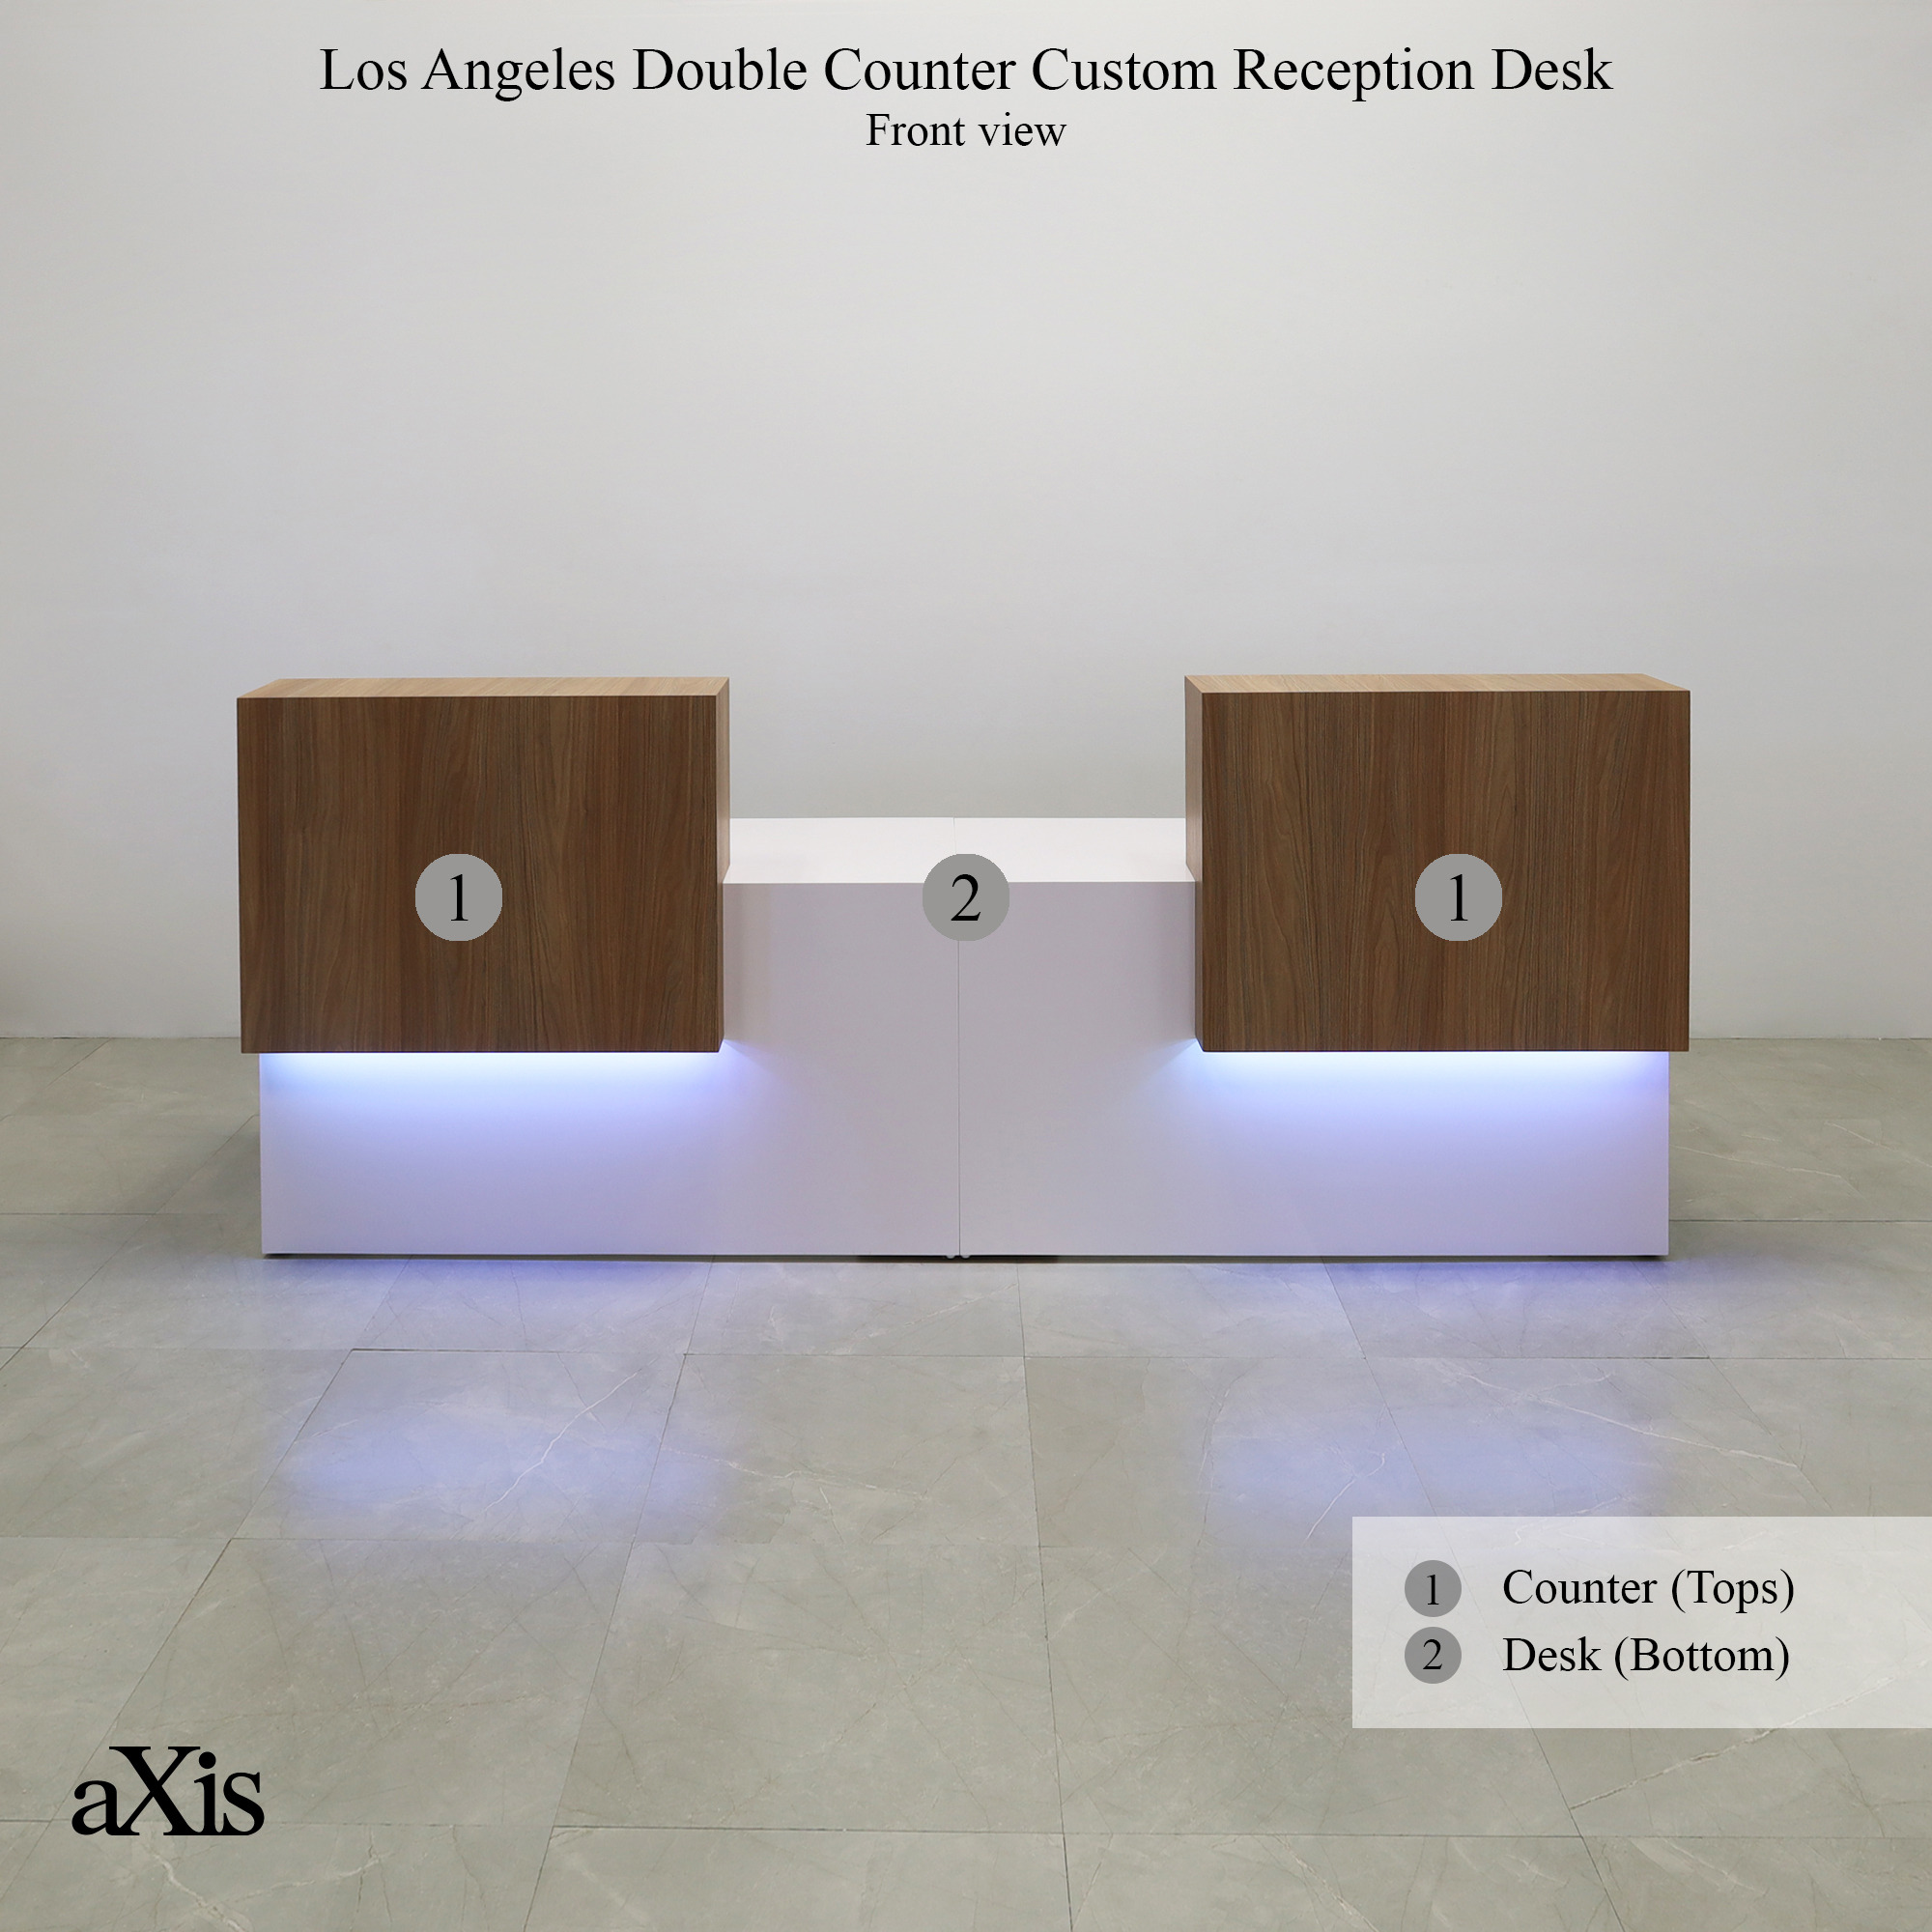 Los Angeles Double Counter Custom Reception Desk explanatory image, shown here.